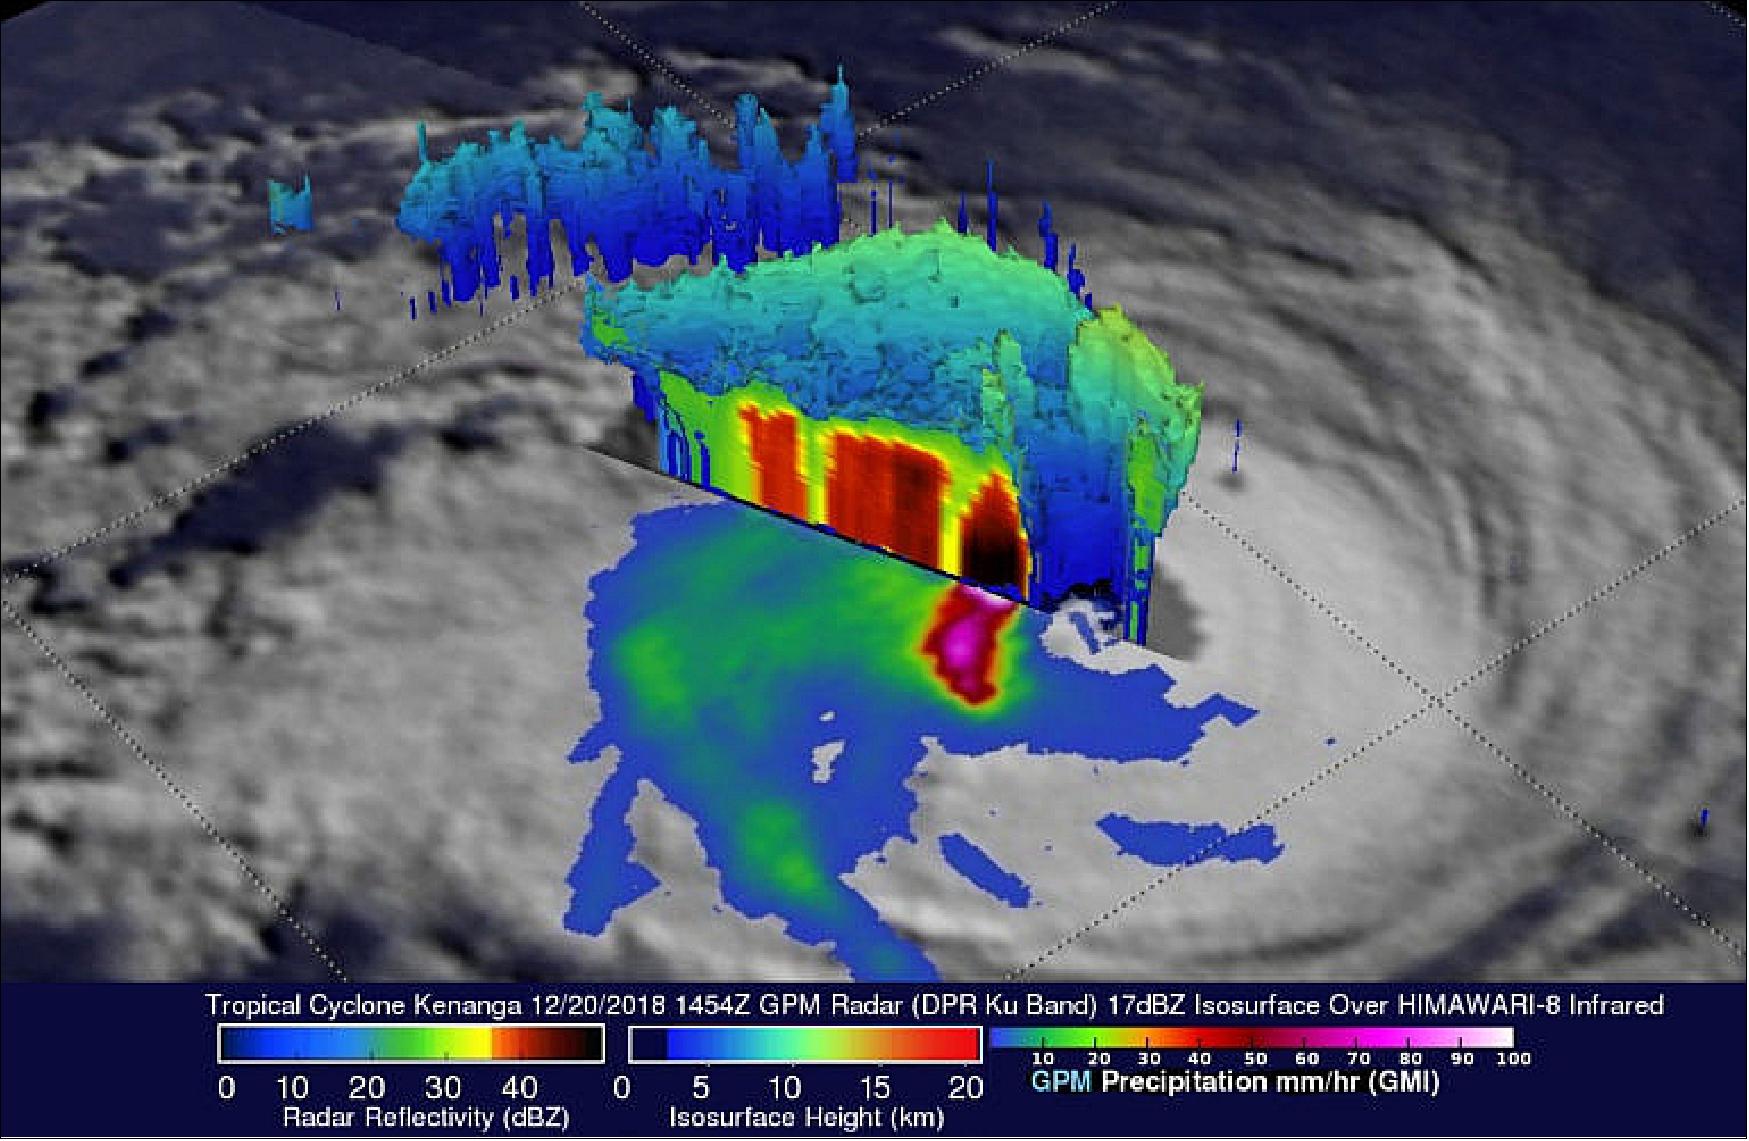 Figure 30: GPM observed powerful storms south of Kenanga’s center on Dec. 20, still producing very heavy rainfall at the rate of 214 mm/hr in that area. The rainfall in the northern half of the storm had decreased significantly. The storm tops of the eyewall which had remained intact on the western side of the cyclone were reaching heights of 12.7 km (image credit: NASA/JAXA, Hal Pierce)